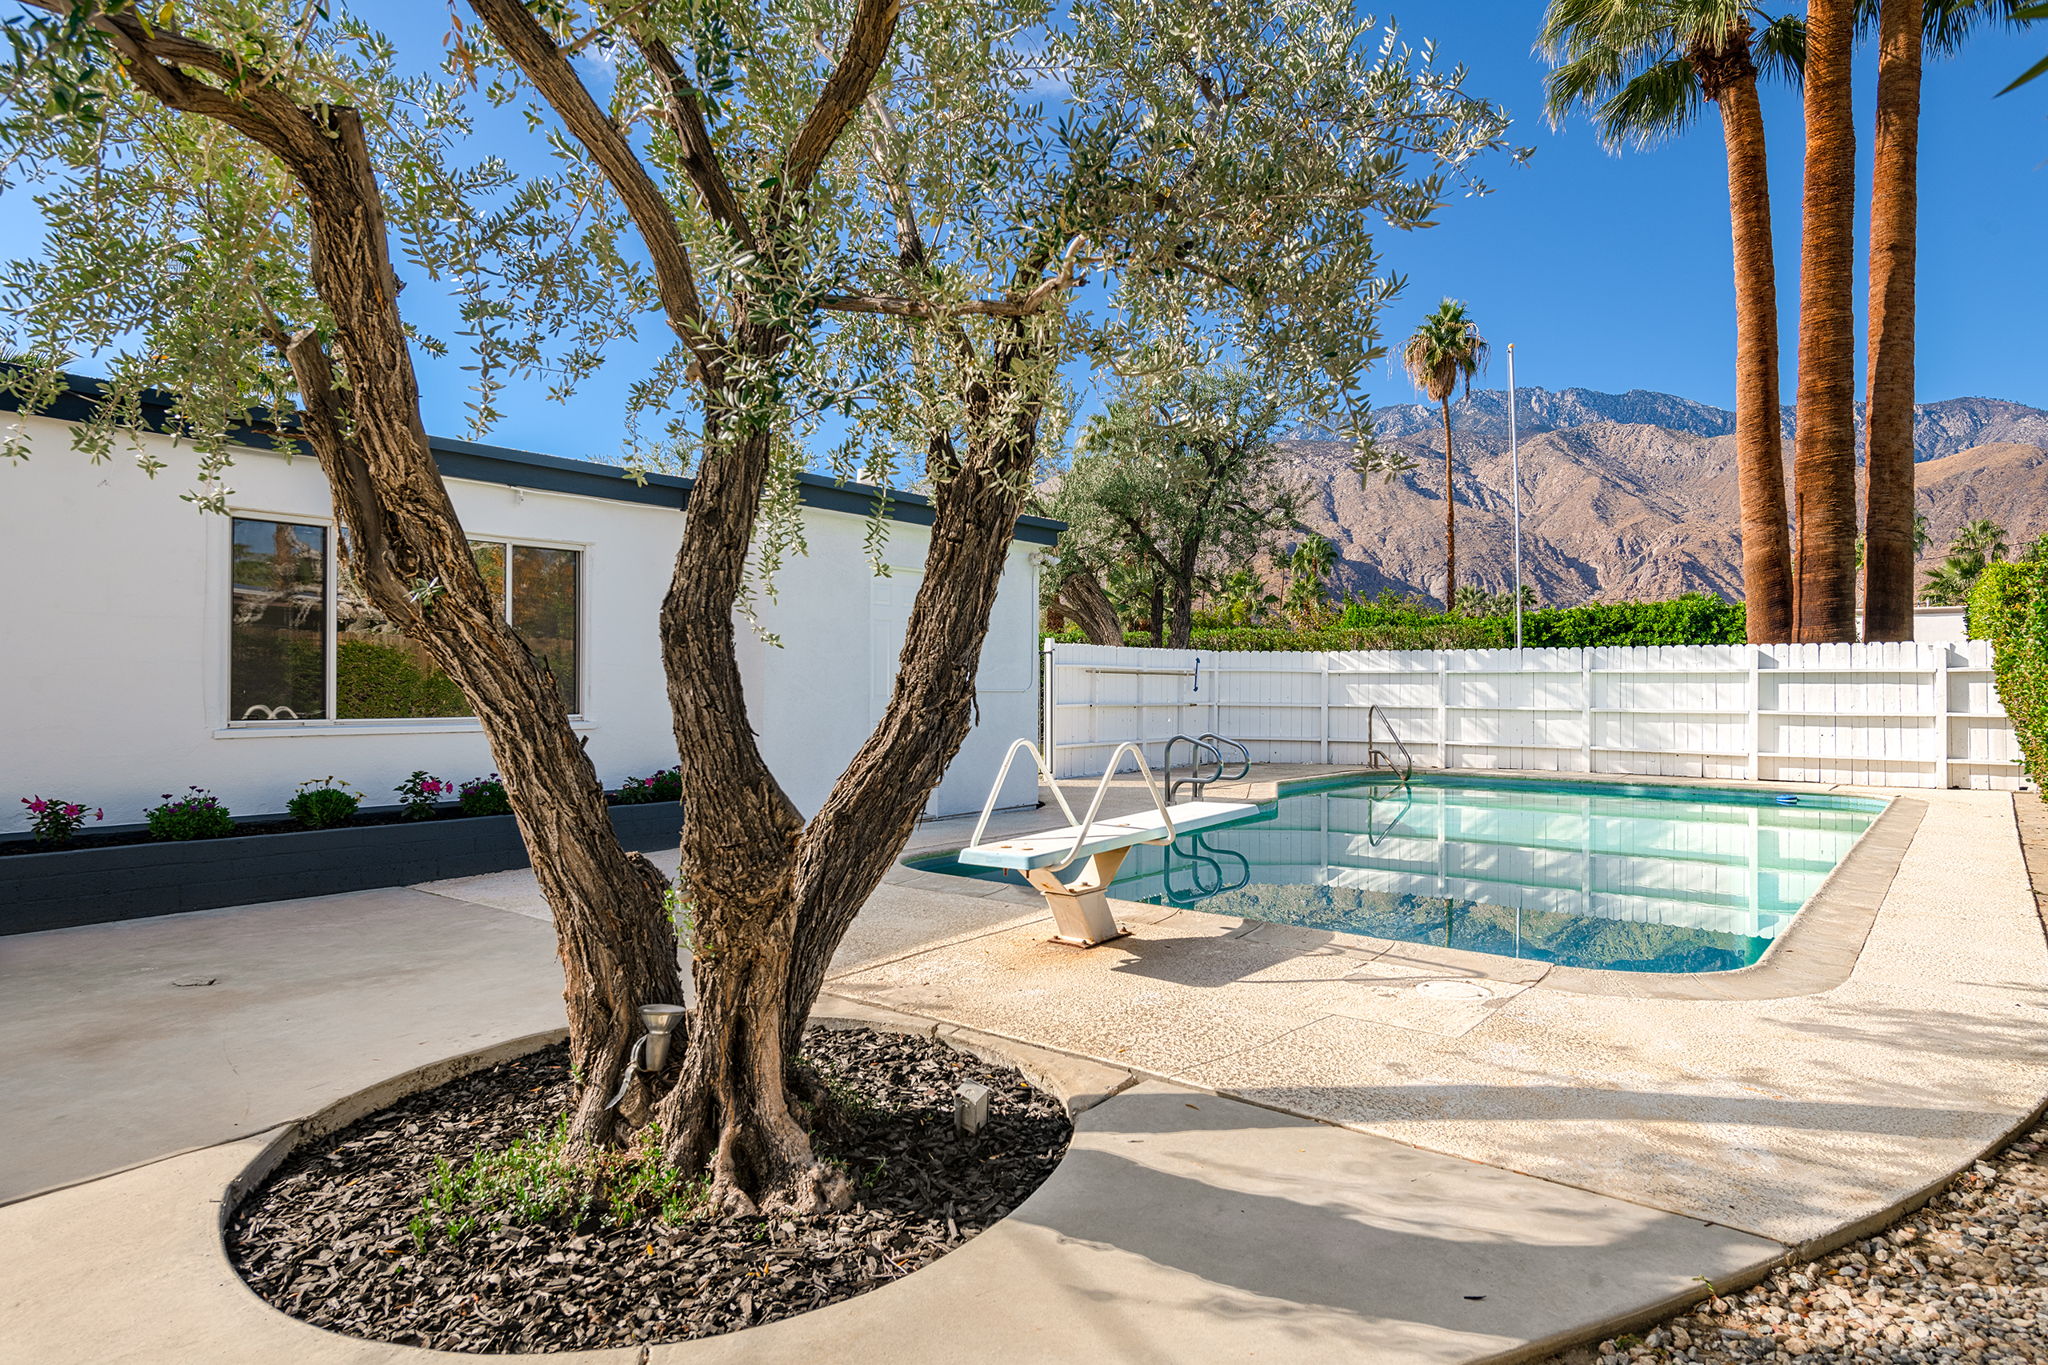  1134 N Calle Rolph, Palm Springs, CA 92262, US Photo 11